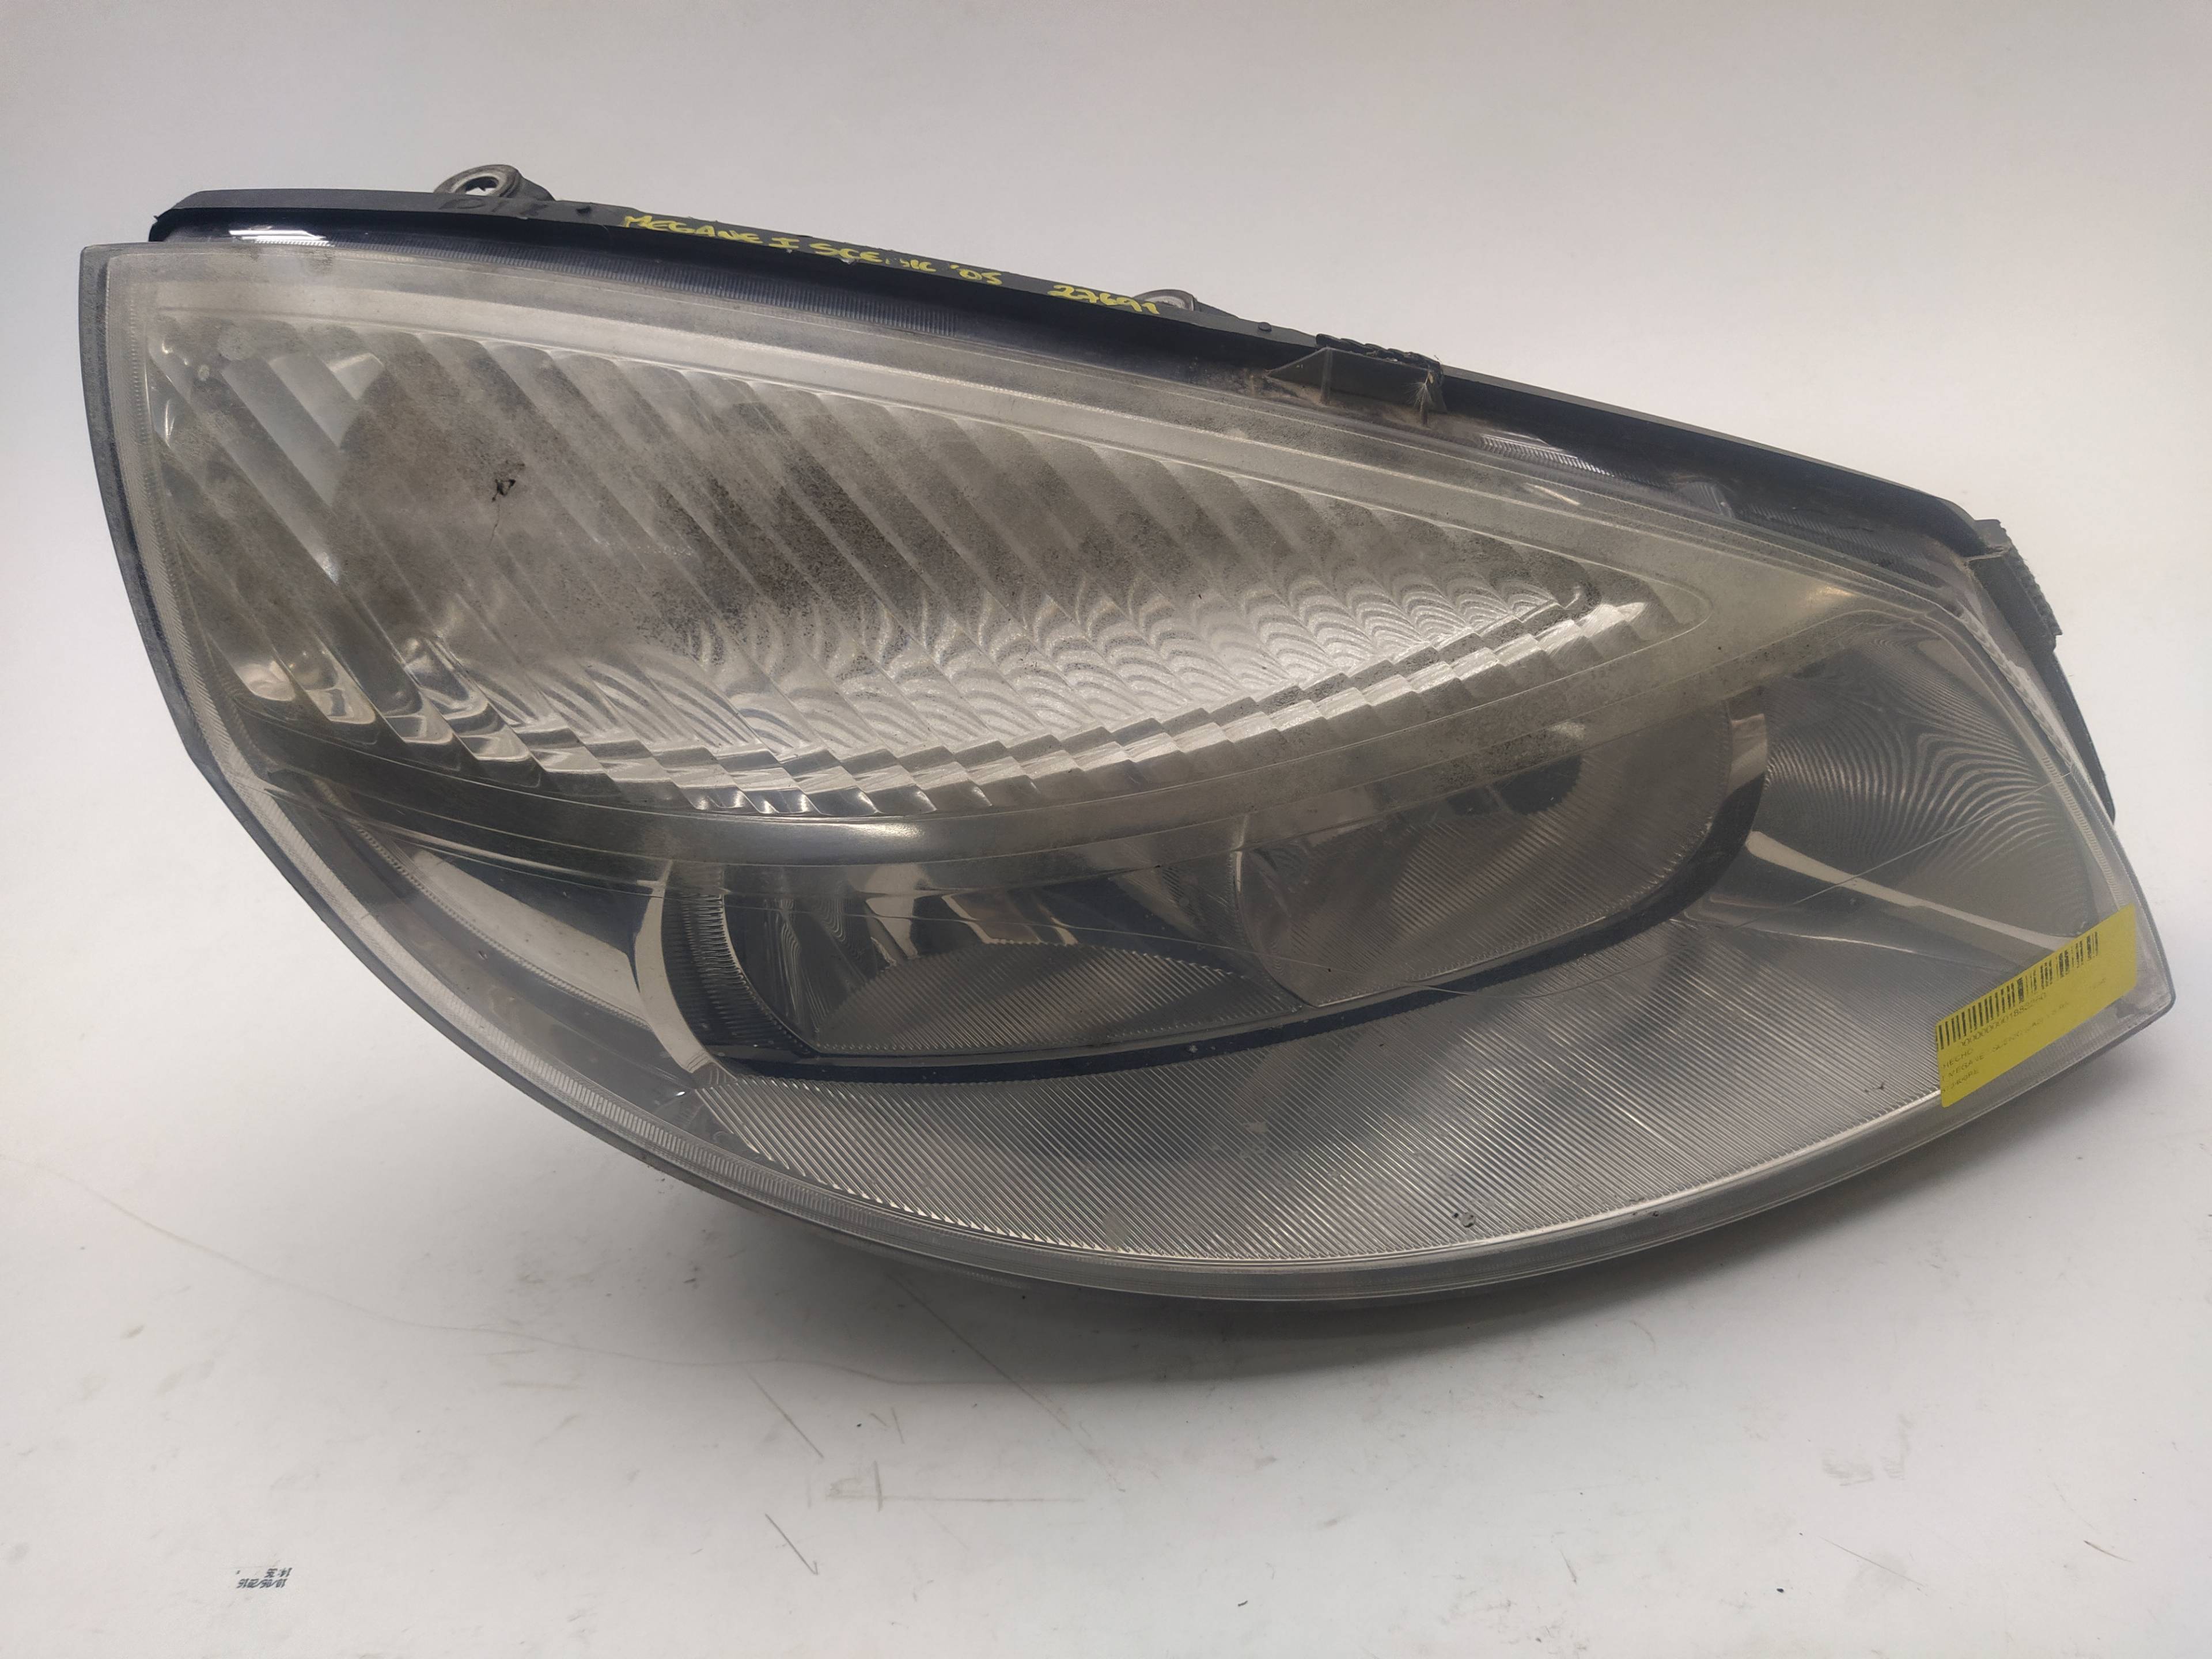 RENAULT Megane 1 generation (1995-2003) Front Right Headlight 15810400RE 18552539